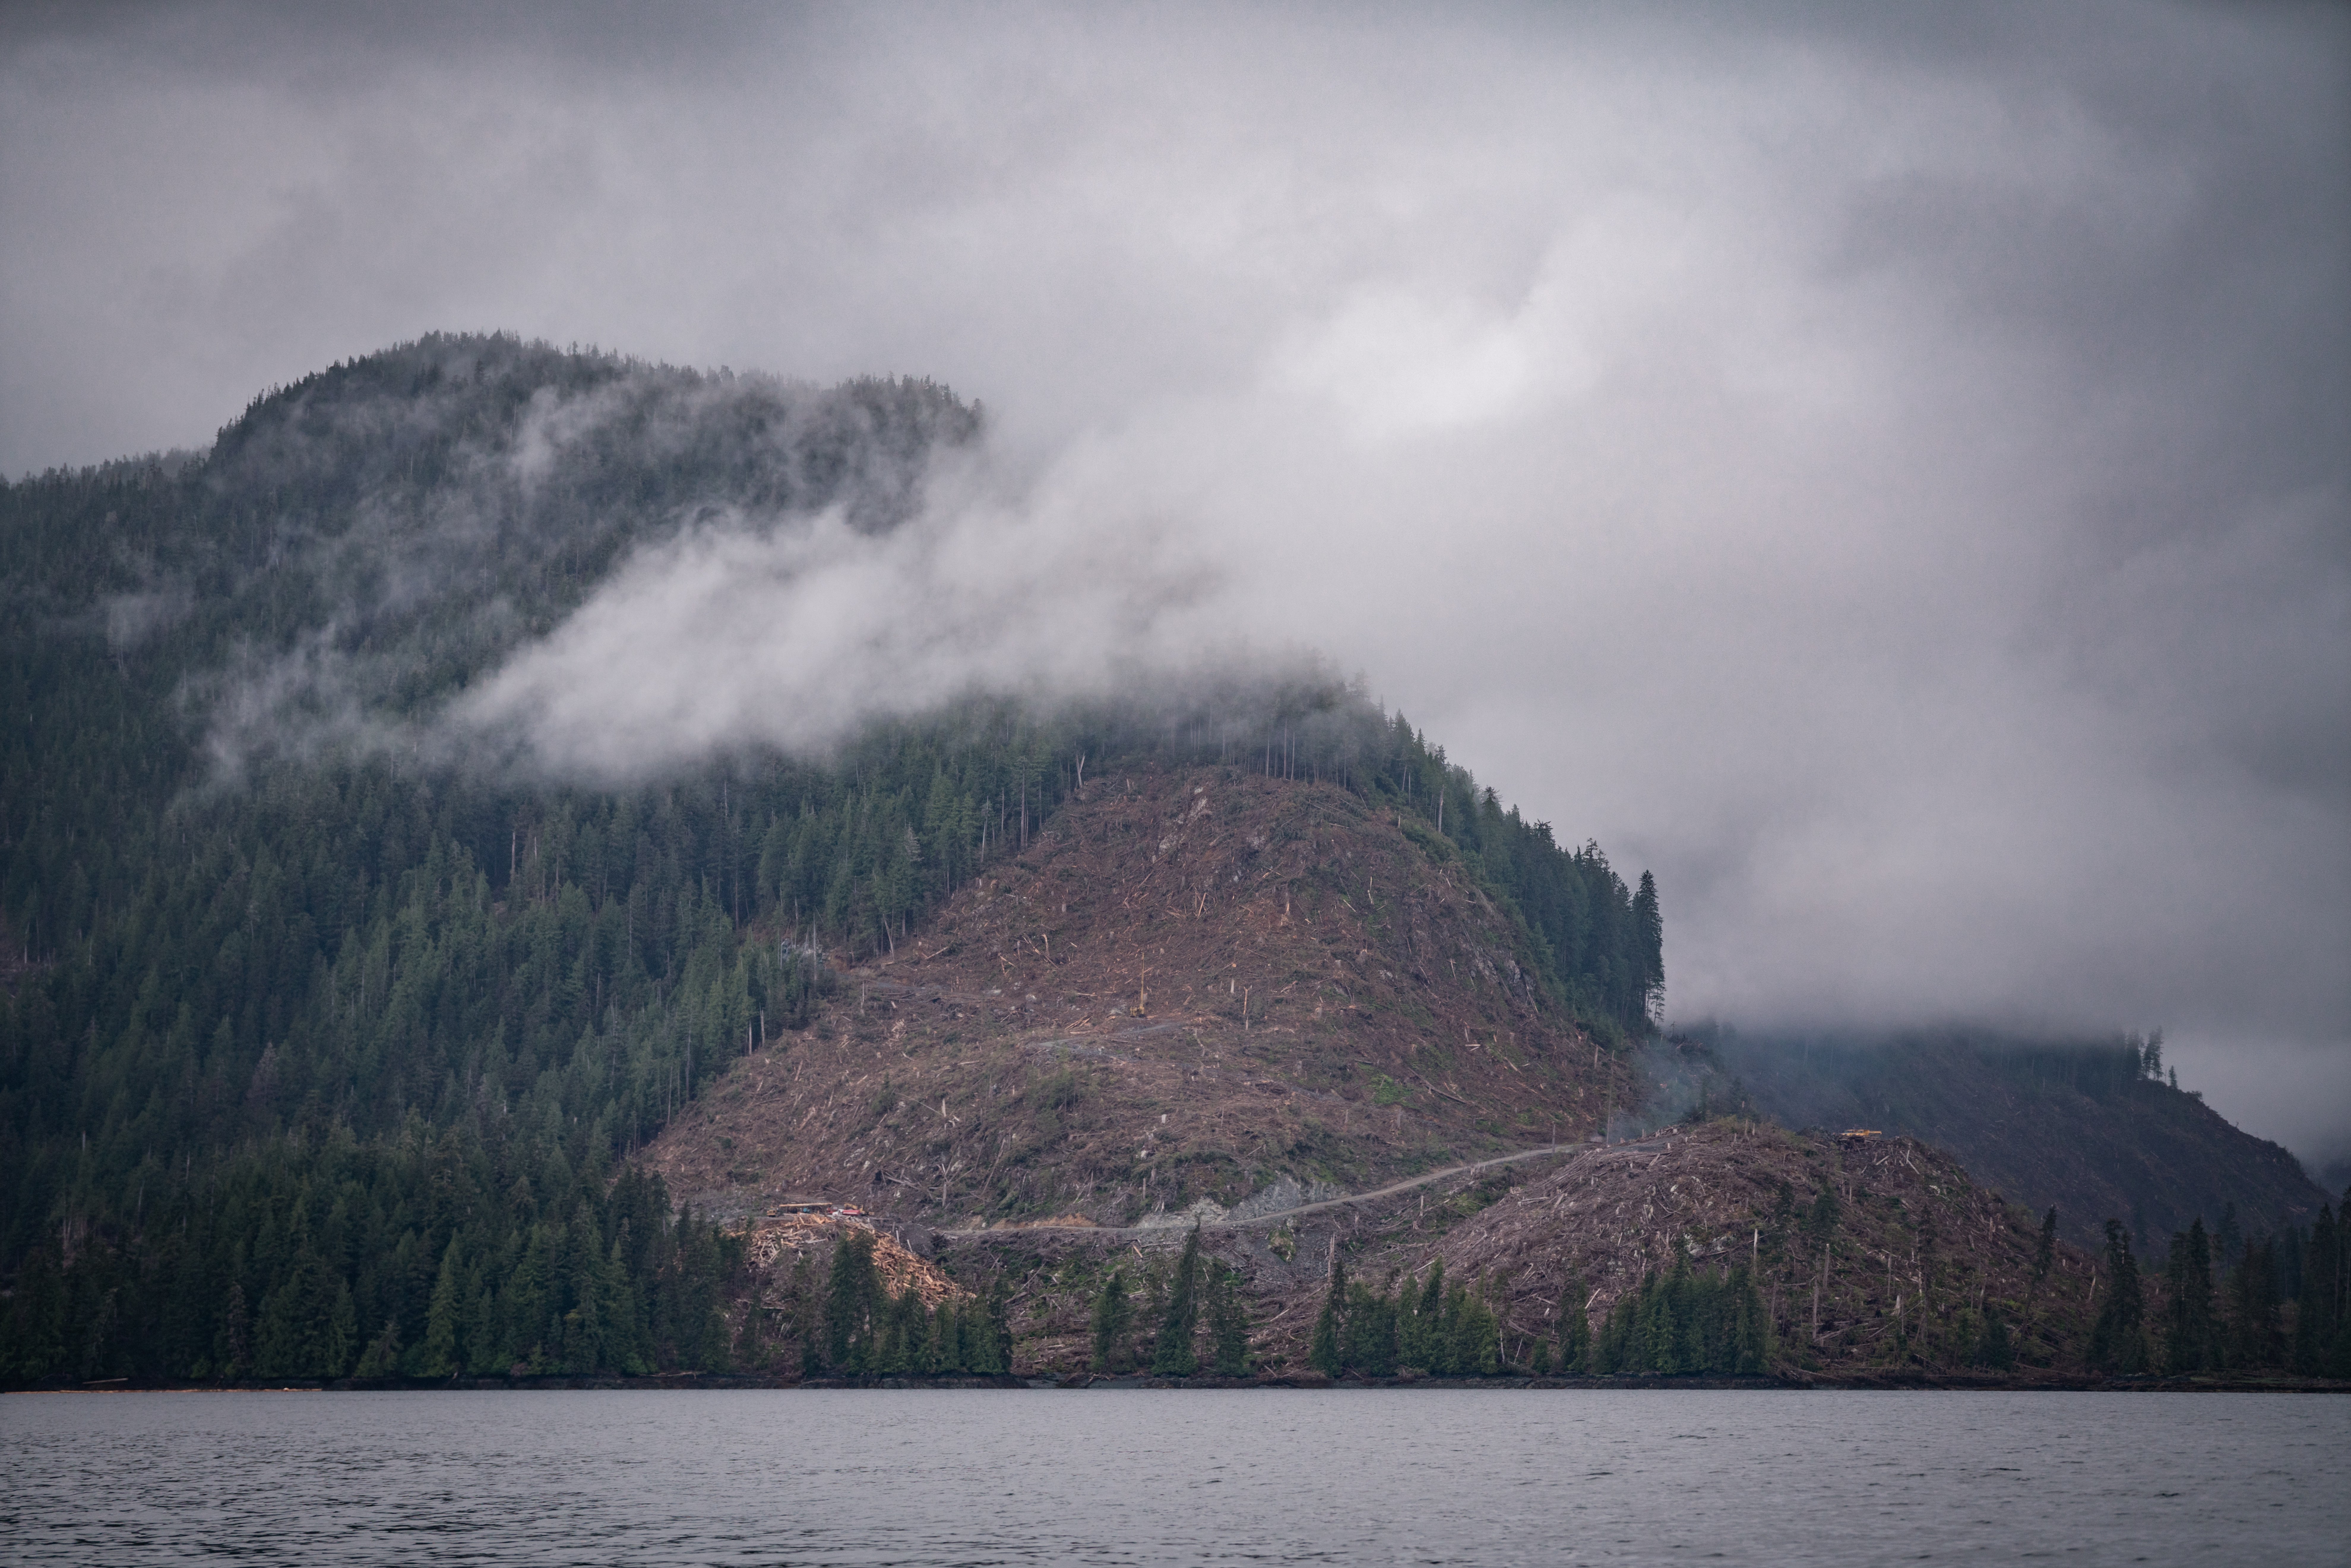 If the Roadless Rule is lifted in the Tongass National Forest, more areas of intact temperate rainforest will be opened to clear-cut logging.
(Photo by Colin Arisman)